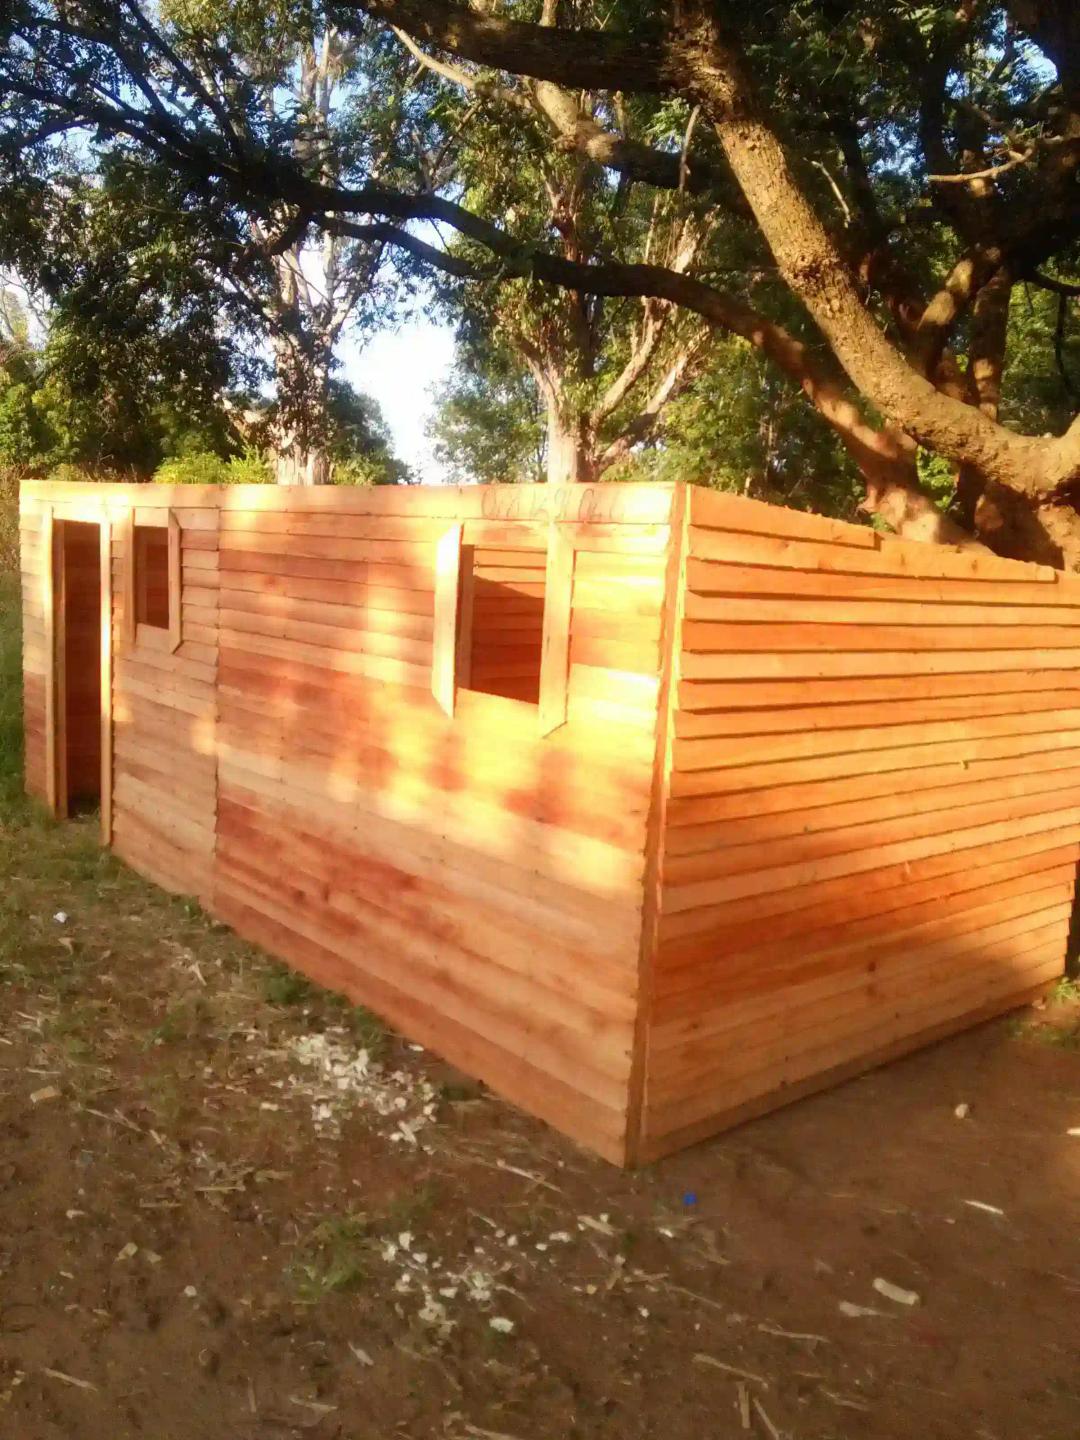 WOODEN CABINS FOR SALE HARARE ZIMBABWE